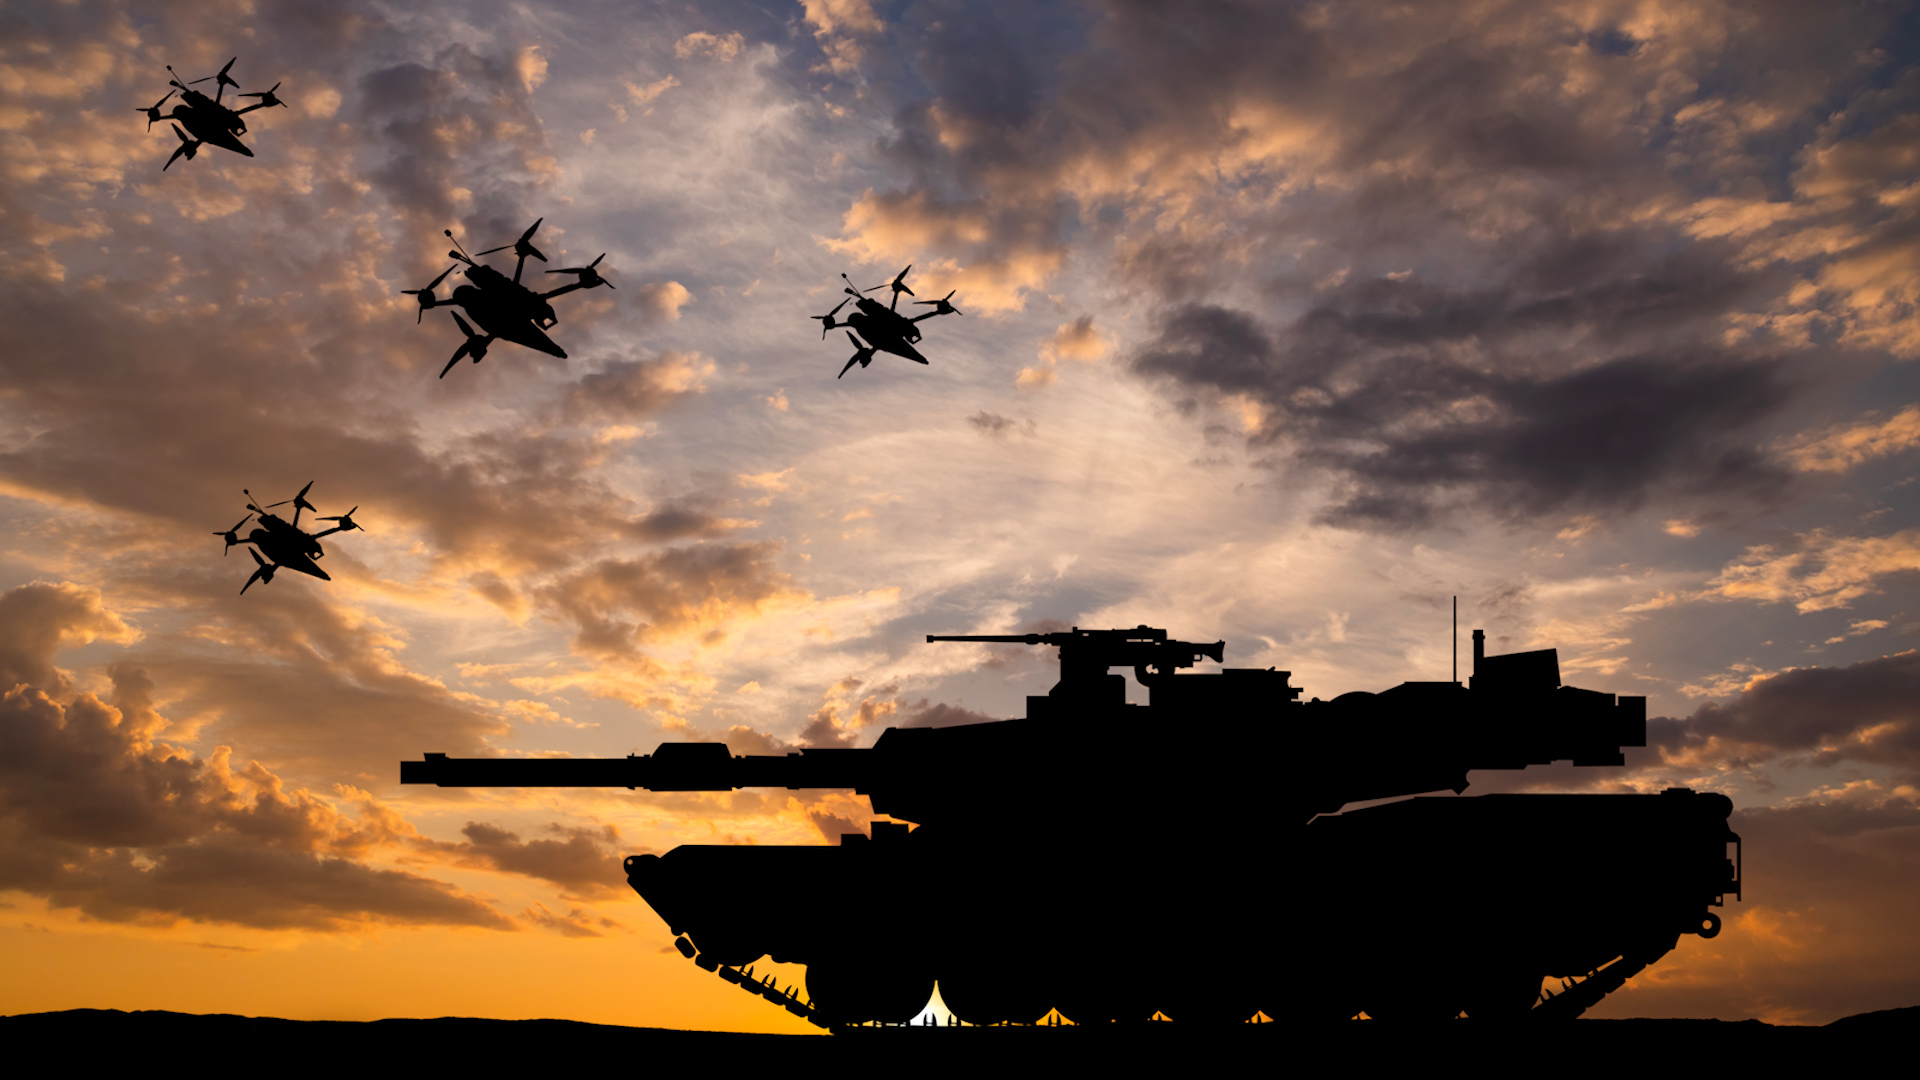 This week on Weapons and Warfare, learn about how drones are changing warfare and national defense and how they need to improve.